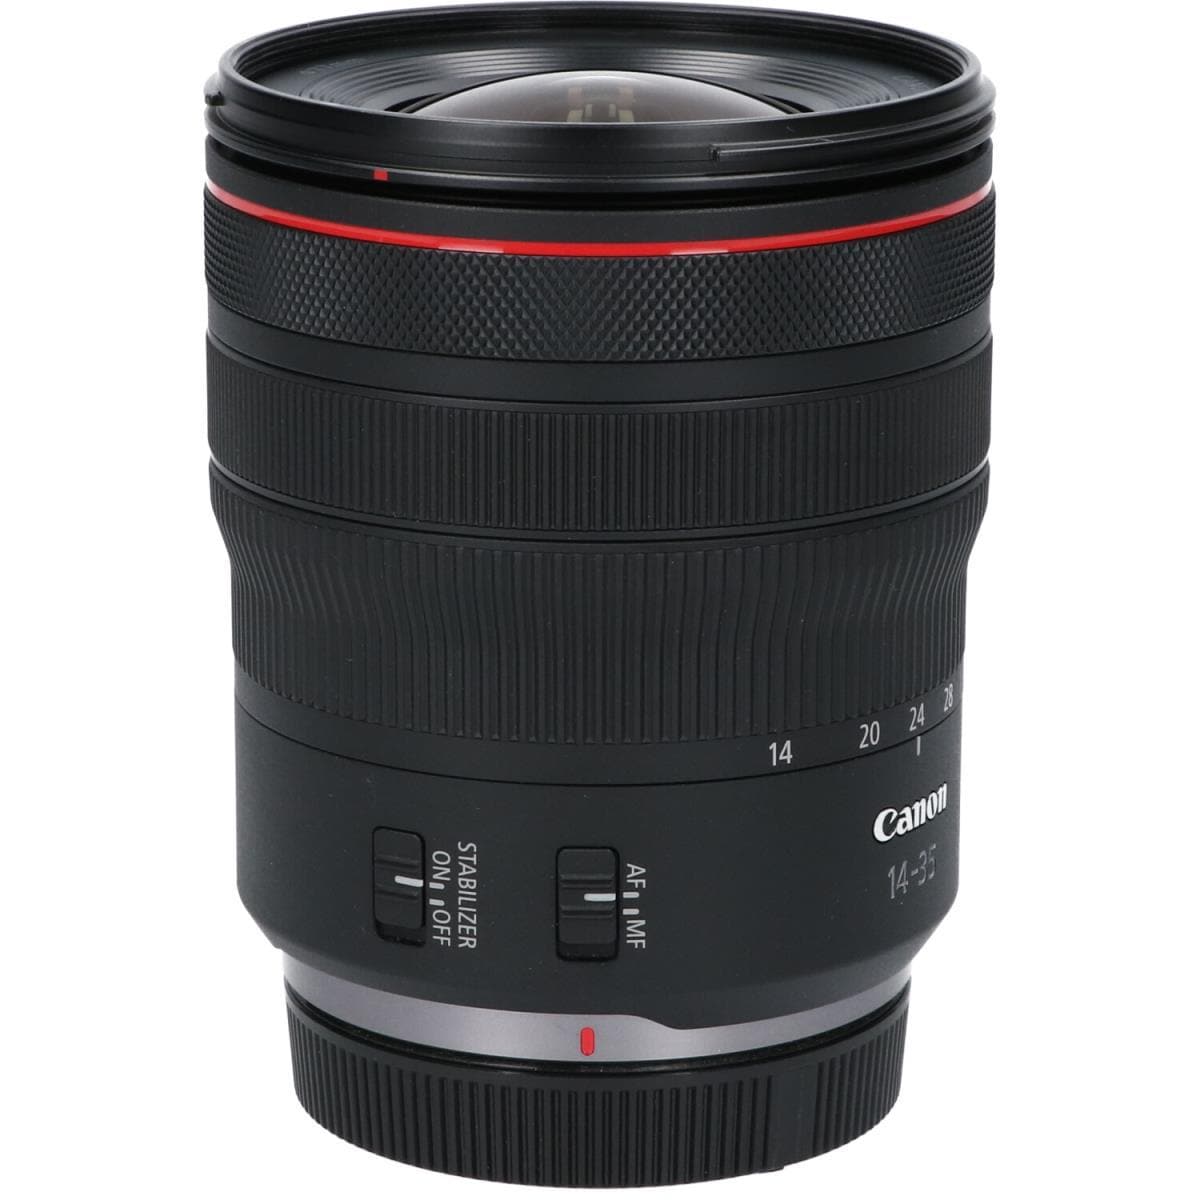 CANON RF14-35mm F4L IS USM